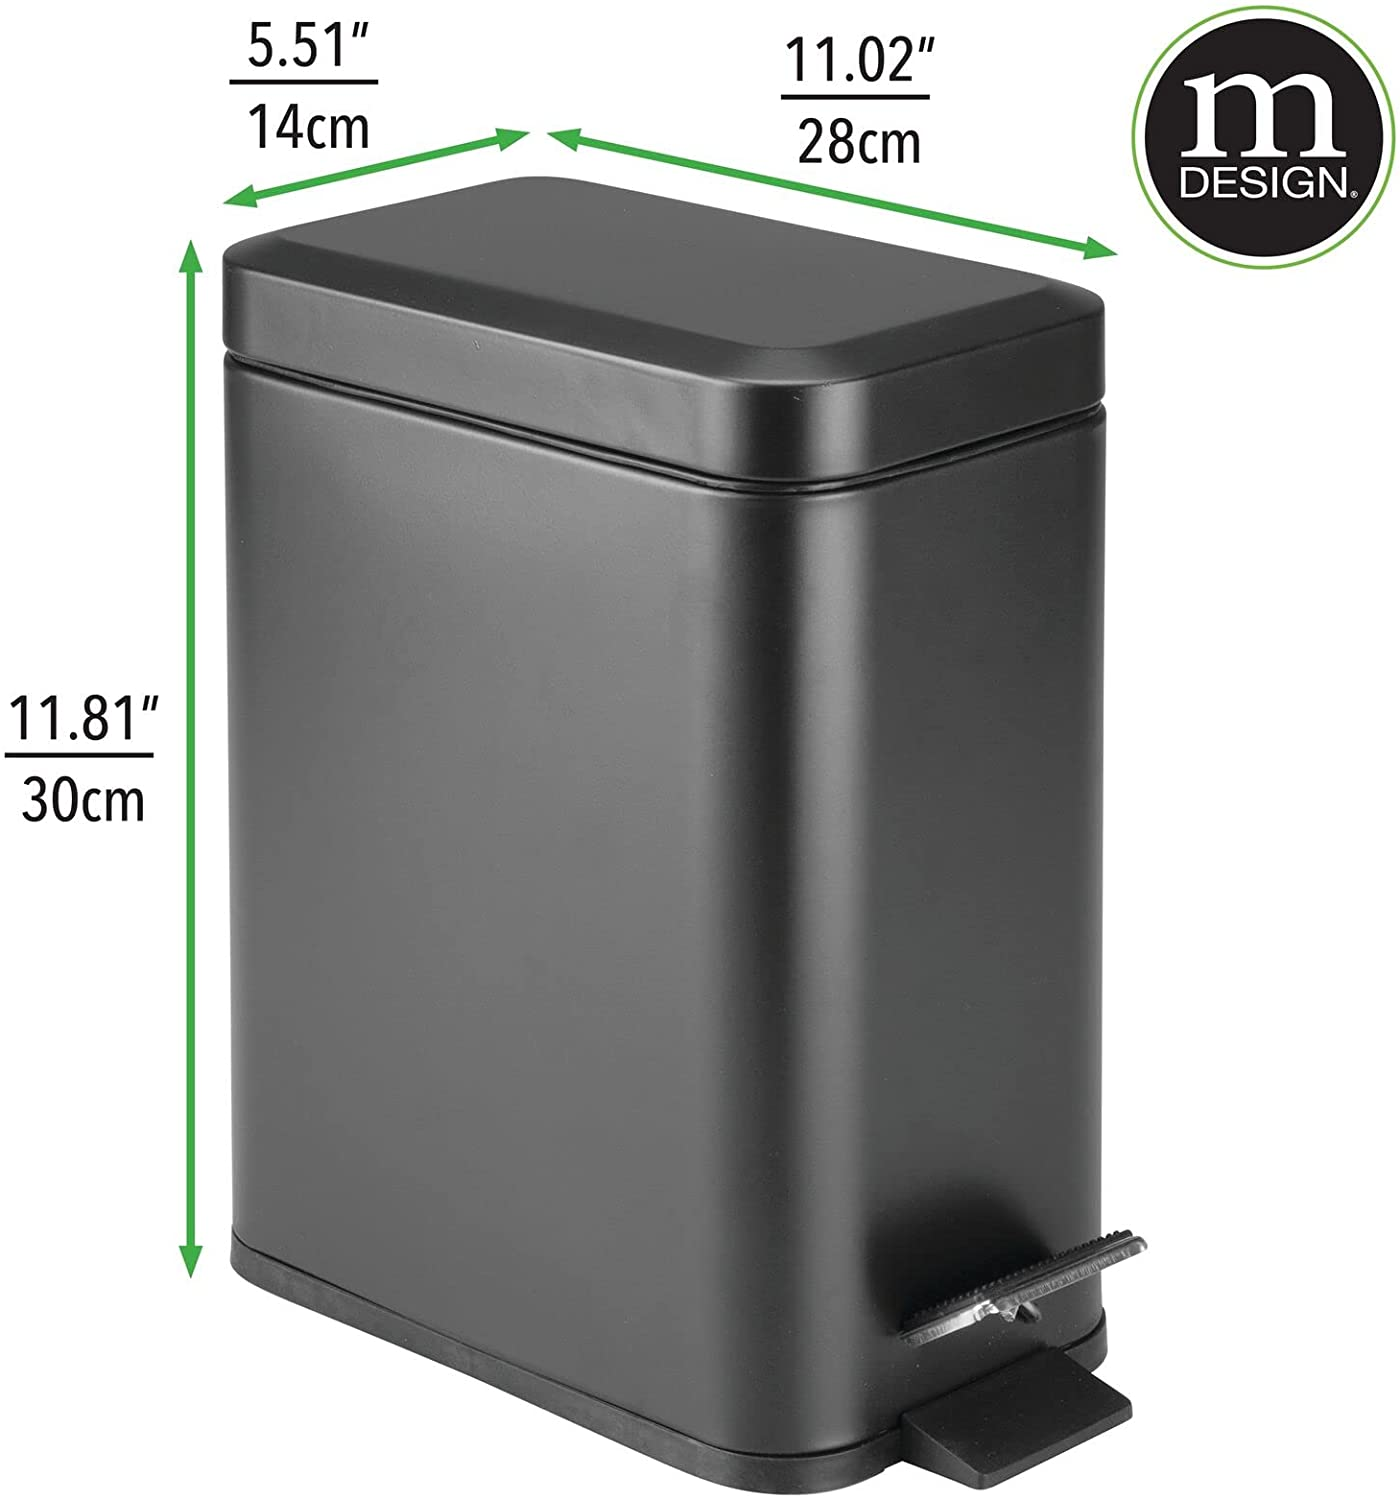 Mdesign Small Modern 1.3 Gallon Rectangle Metal Lidded Step Trash Can, Compact Garbage Bin with Removable Liner Bucket and Handle for Bathroom, Kitchen, Craft Room, Office, Garage - Black